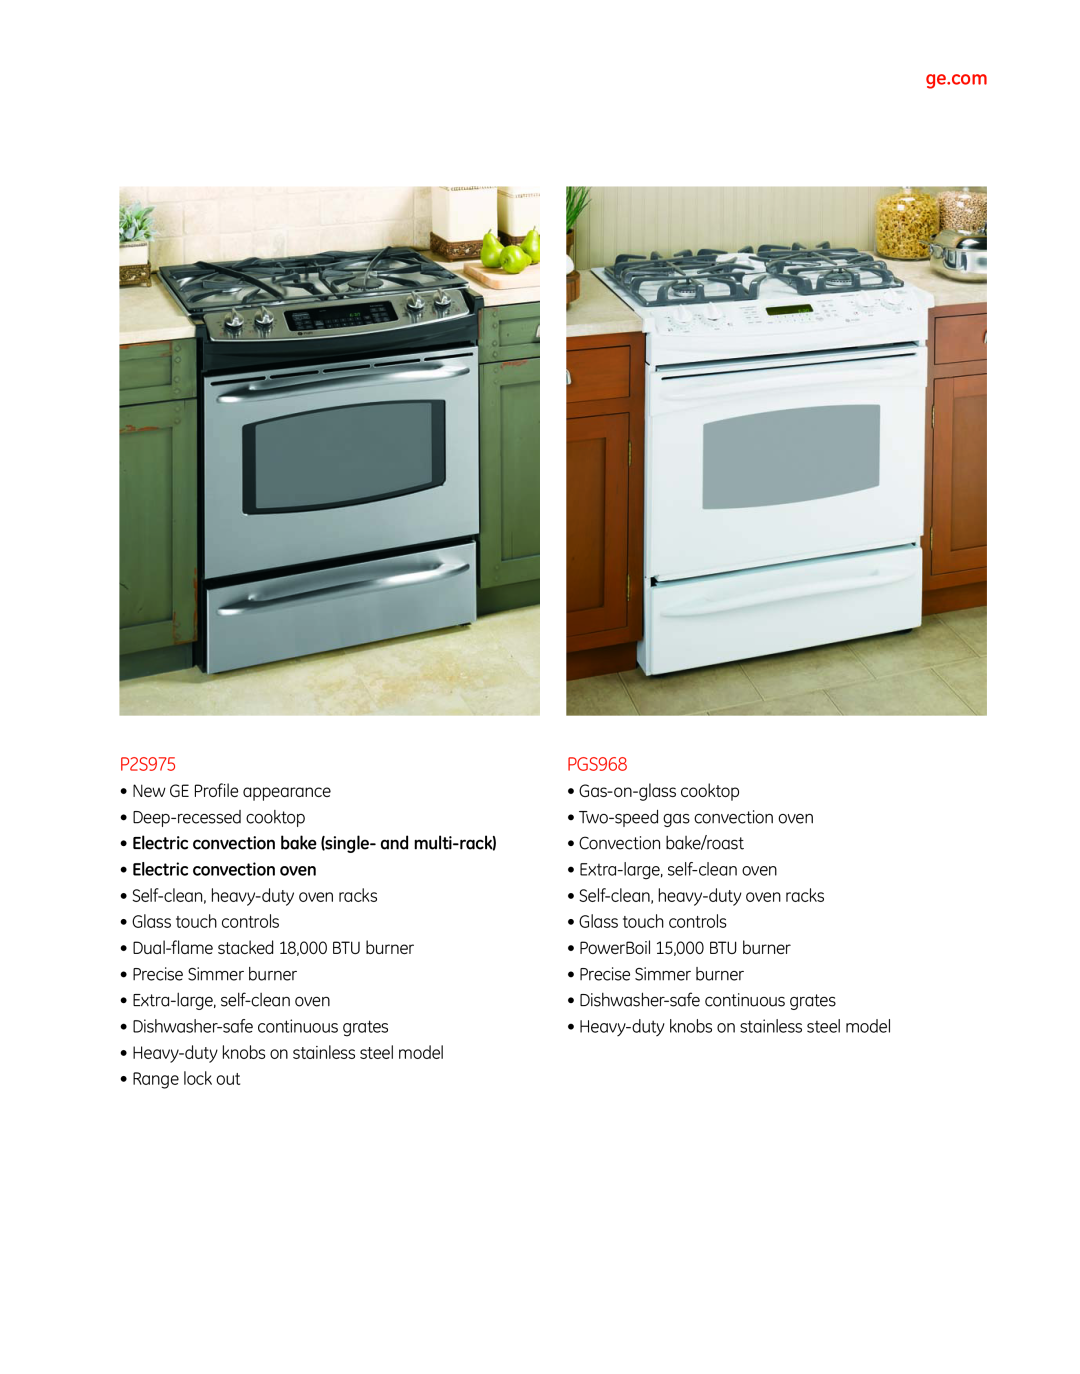 GE Monogram PGS975 manual ge.com, P2S975, PGS968, Electric convection bake single- and multi-rack, Electric convection oven 